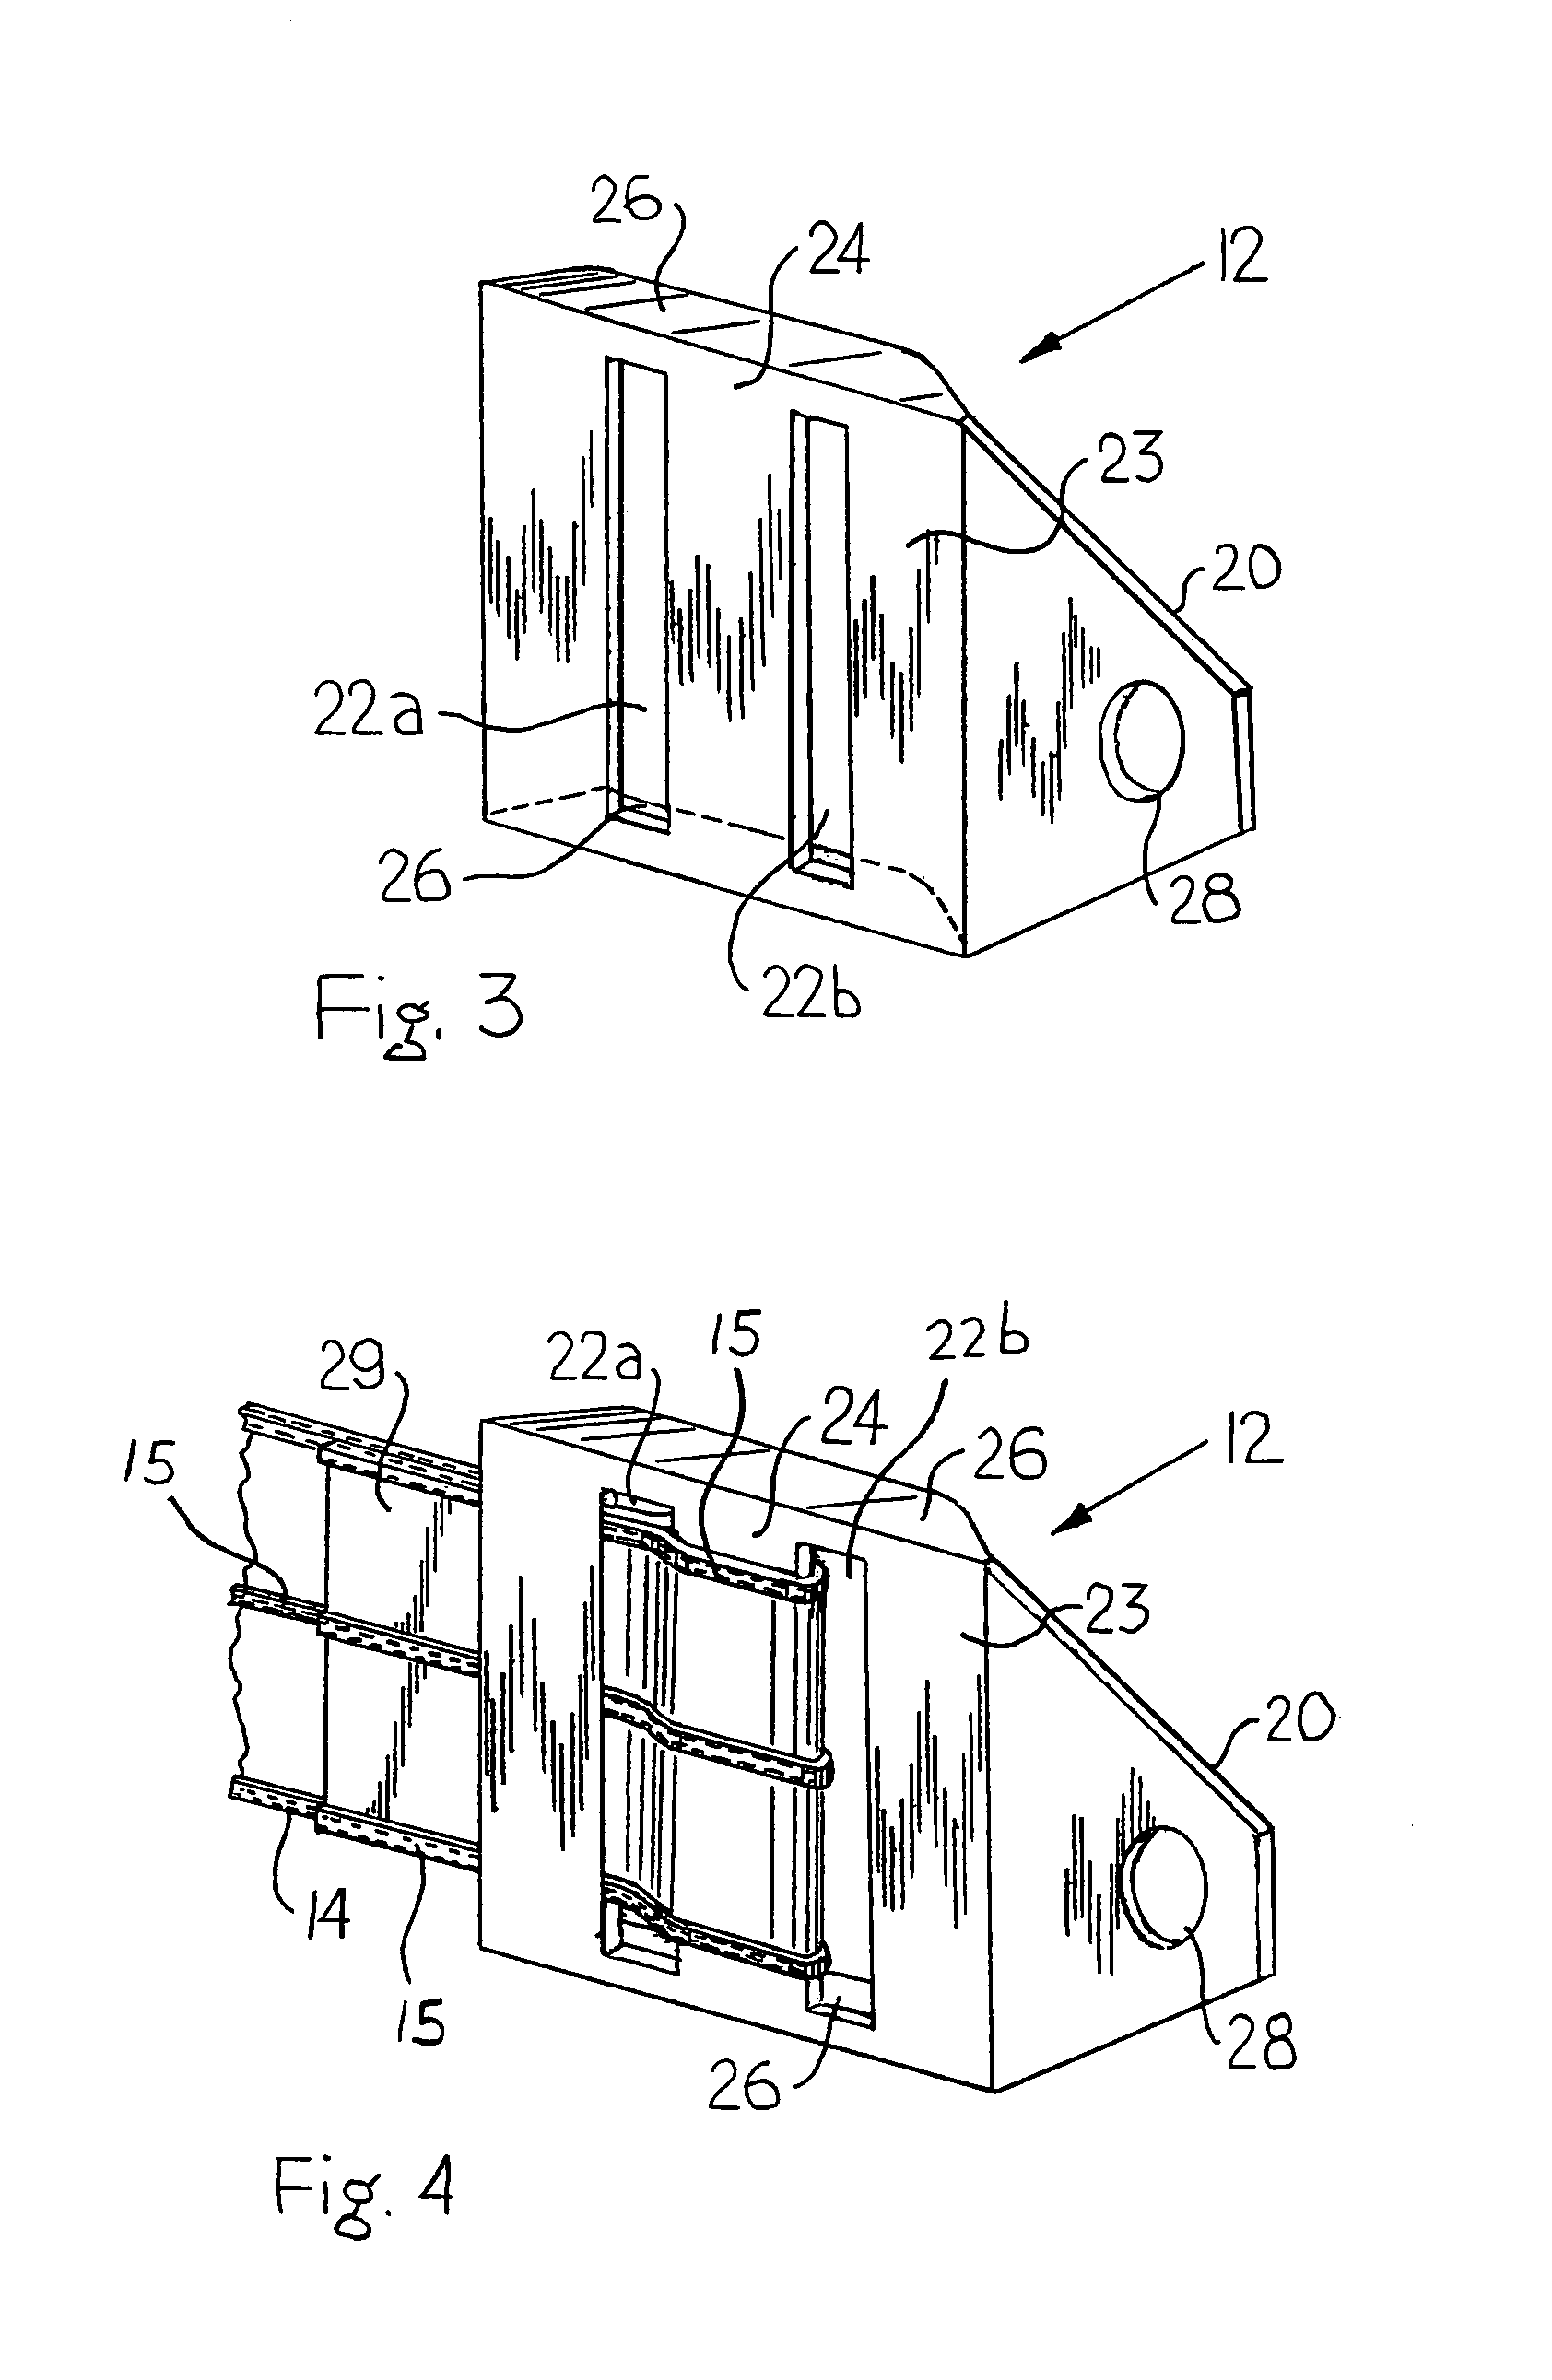 Connection system for plastic web fencing